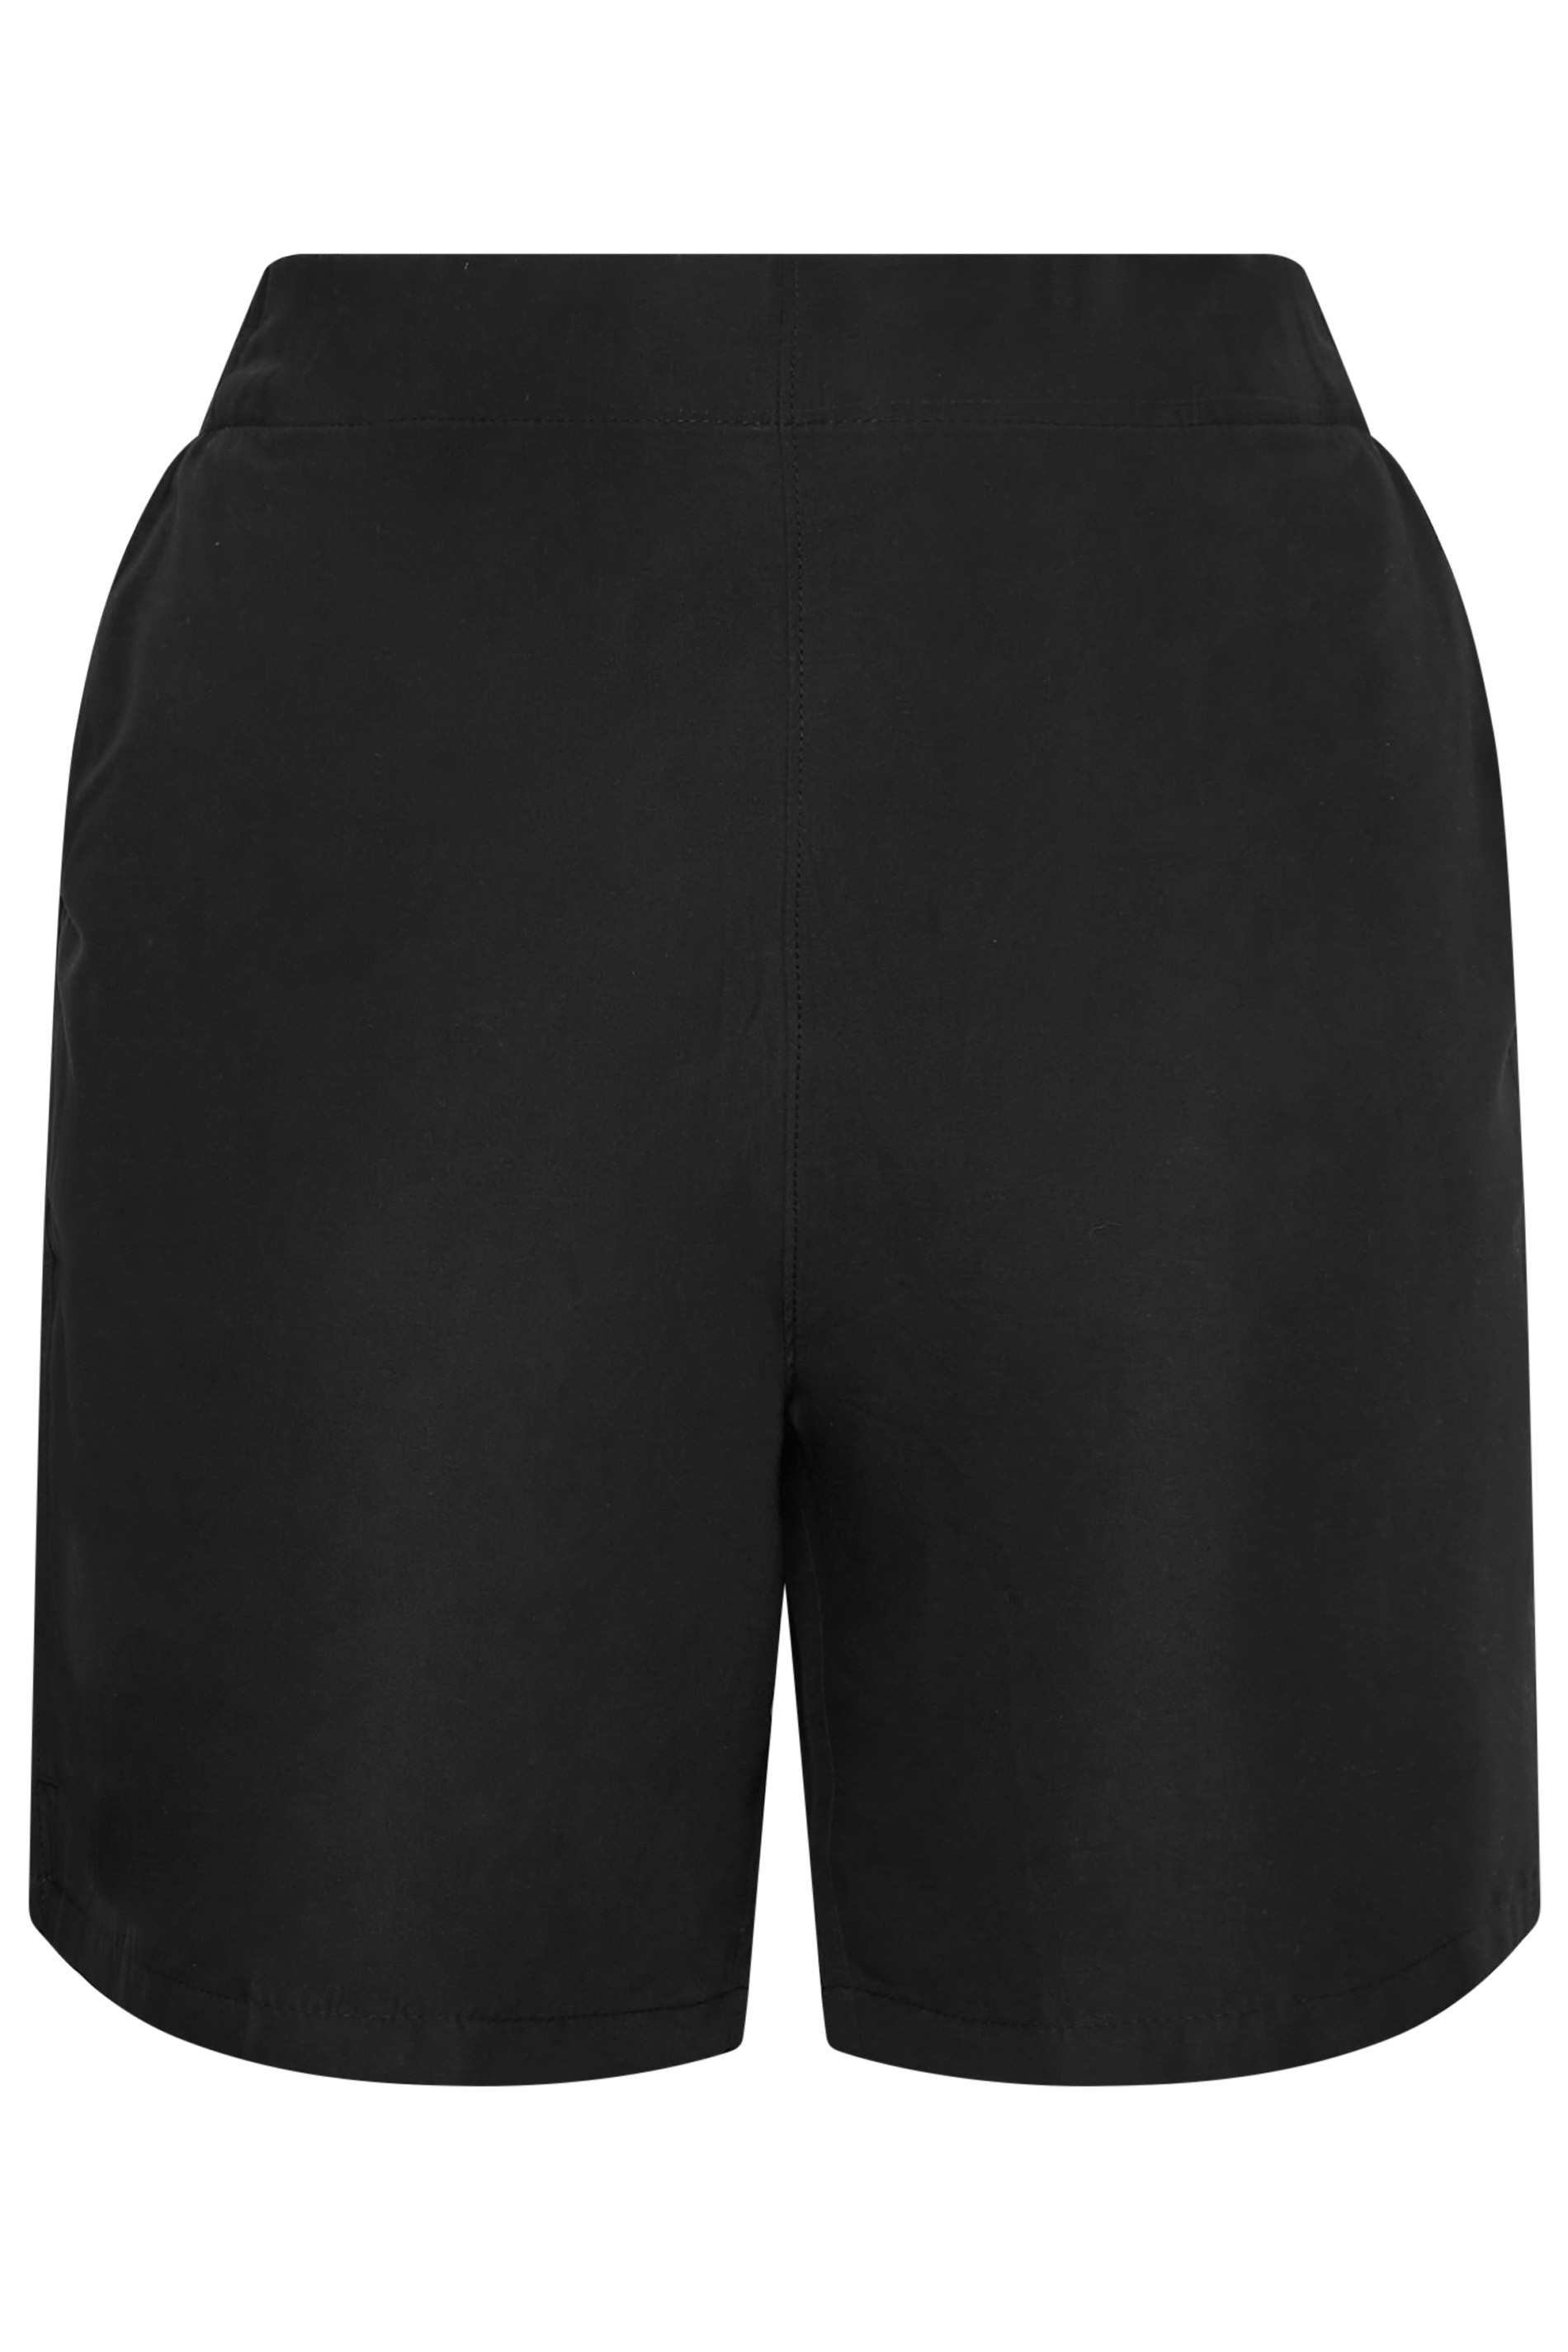 Plus Size Black Board Shorts | Yours Clothing